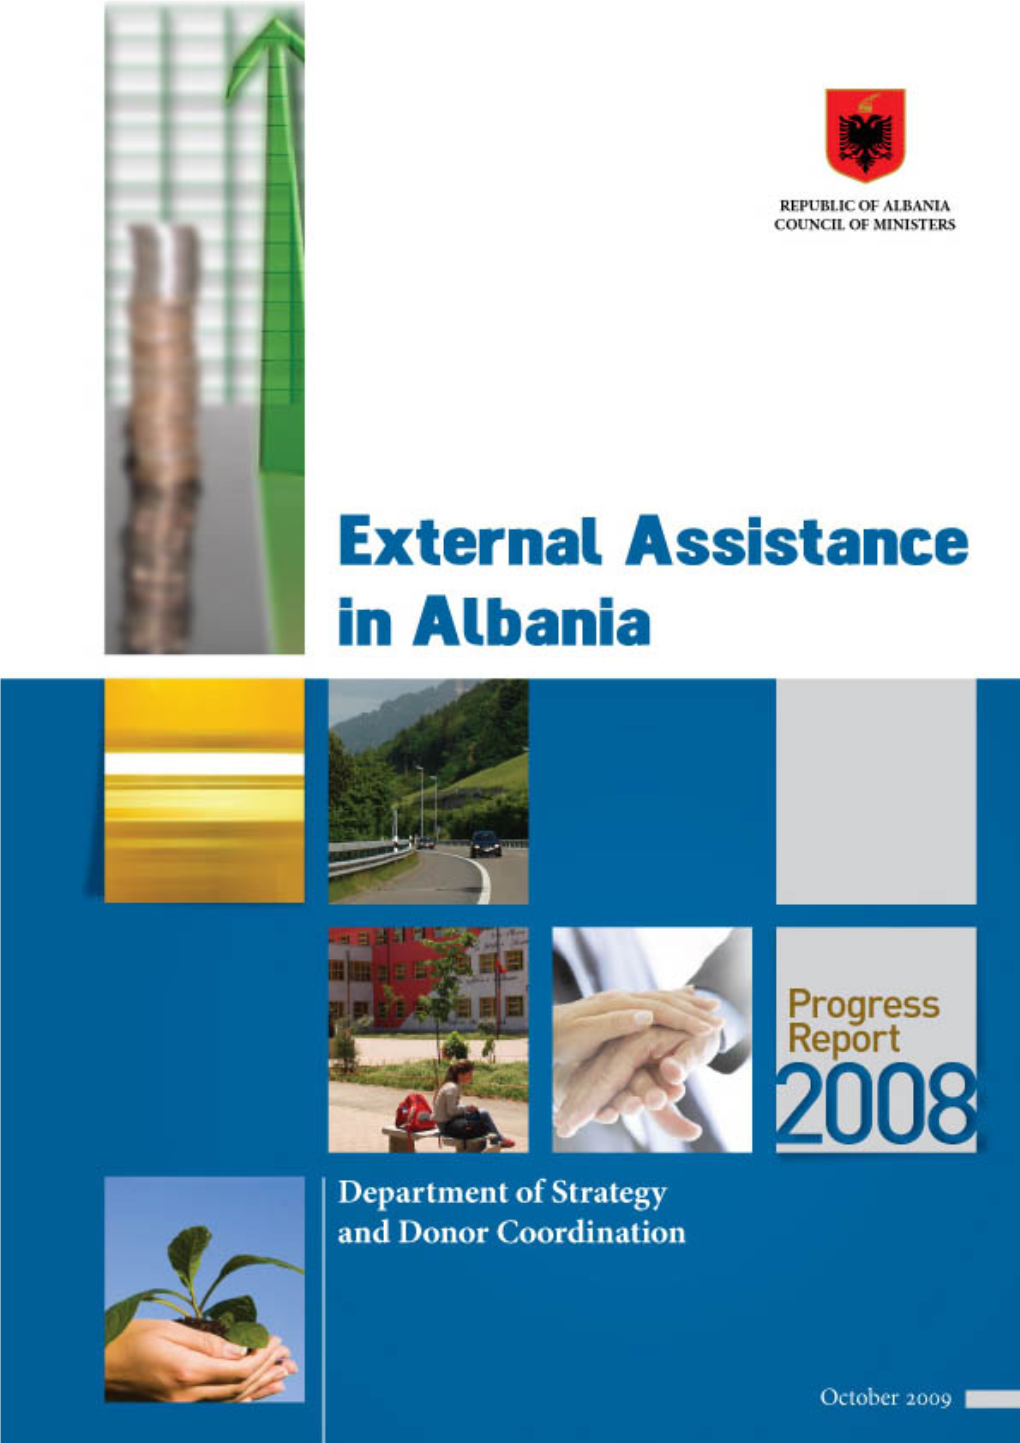 External Assistance in Albania